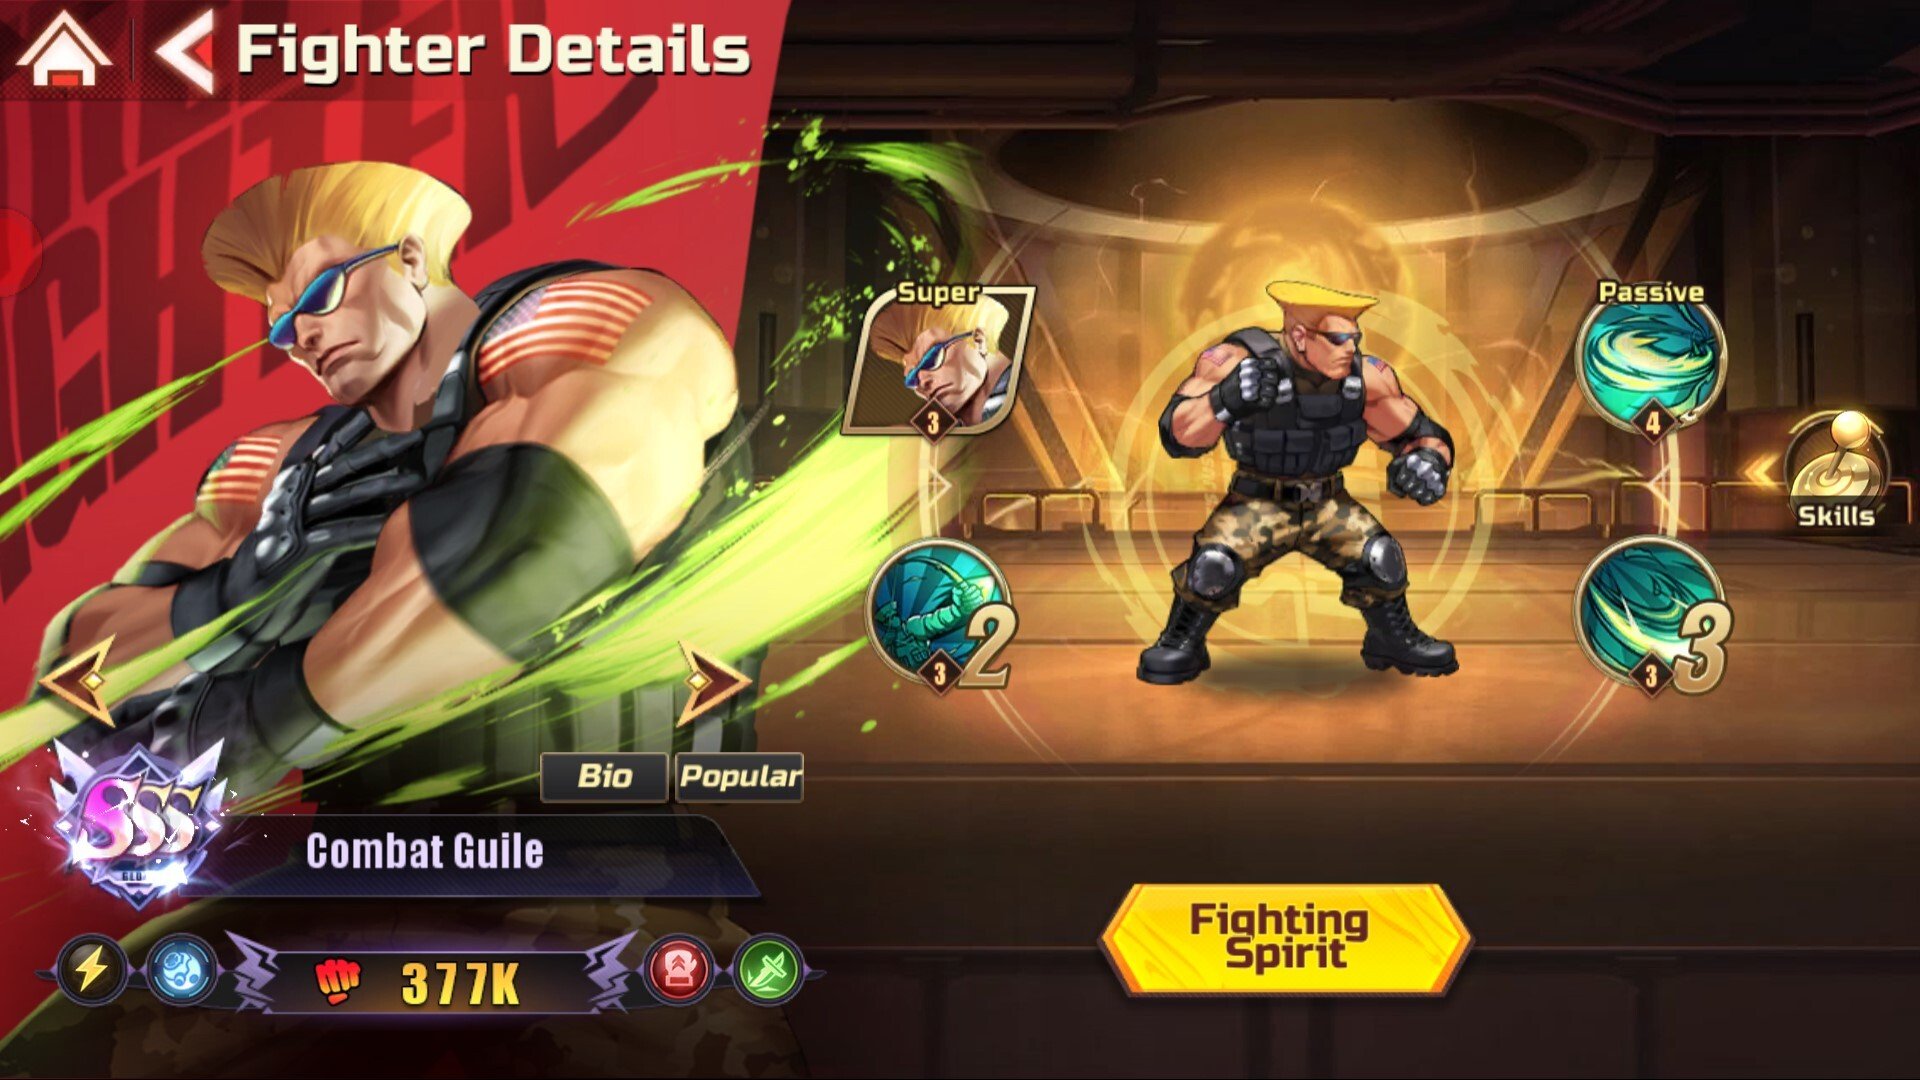 Crunchyroll Games launched Street Fighter: Duel for iOS and